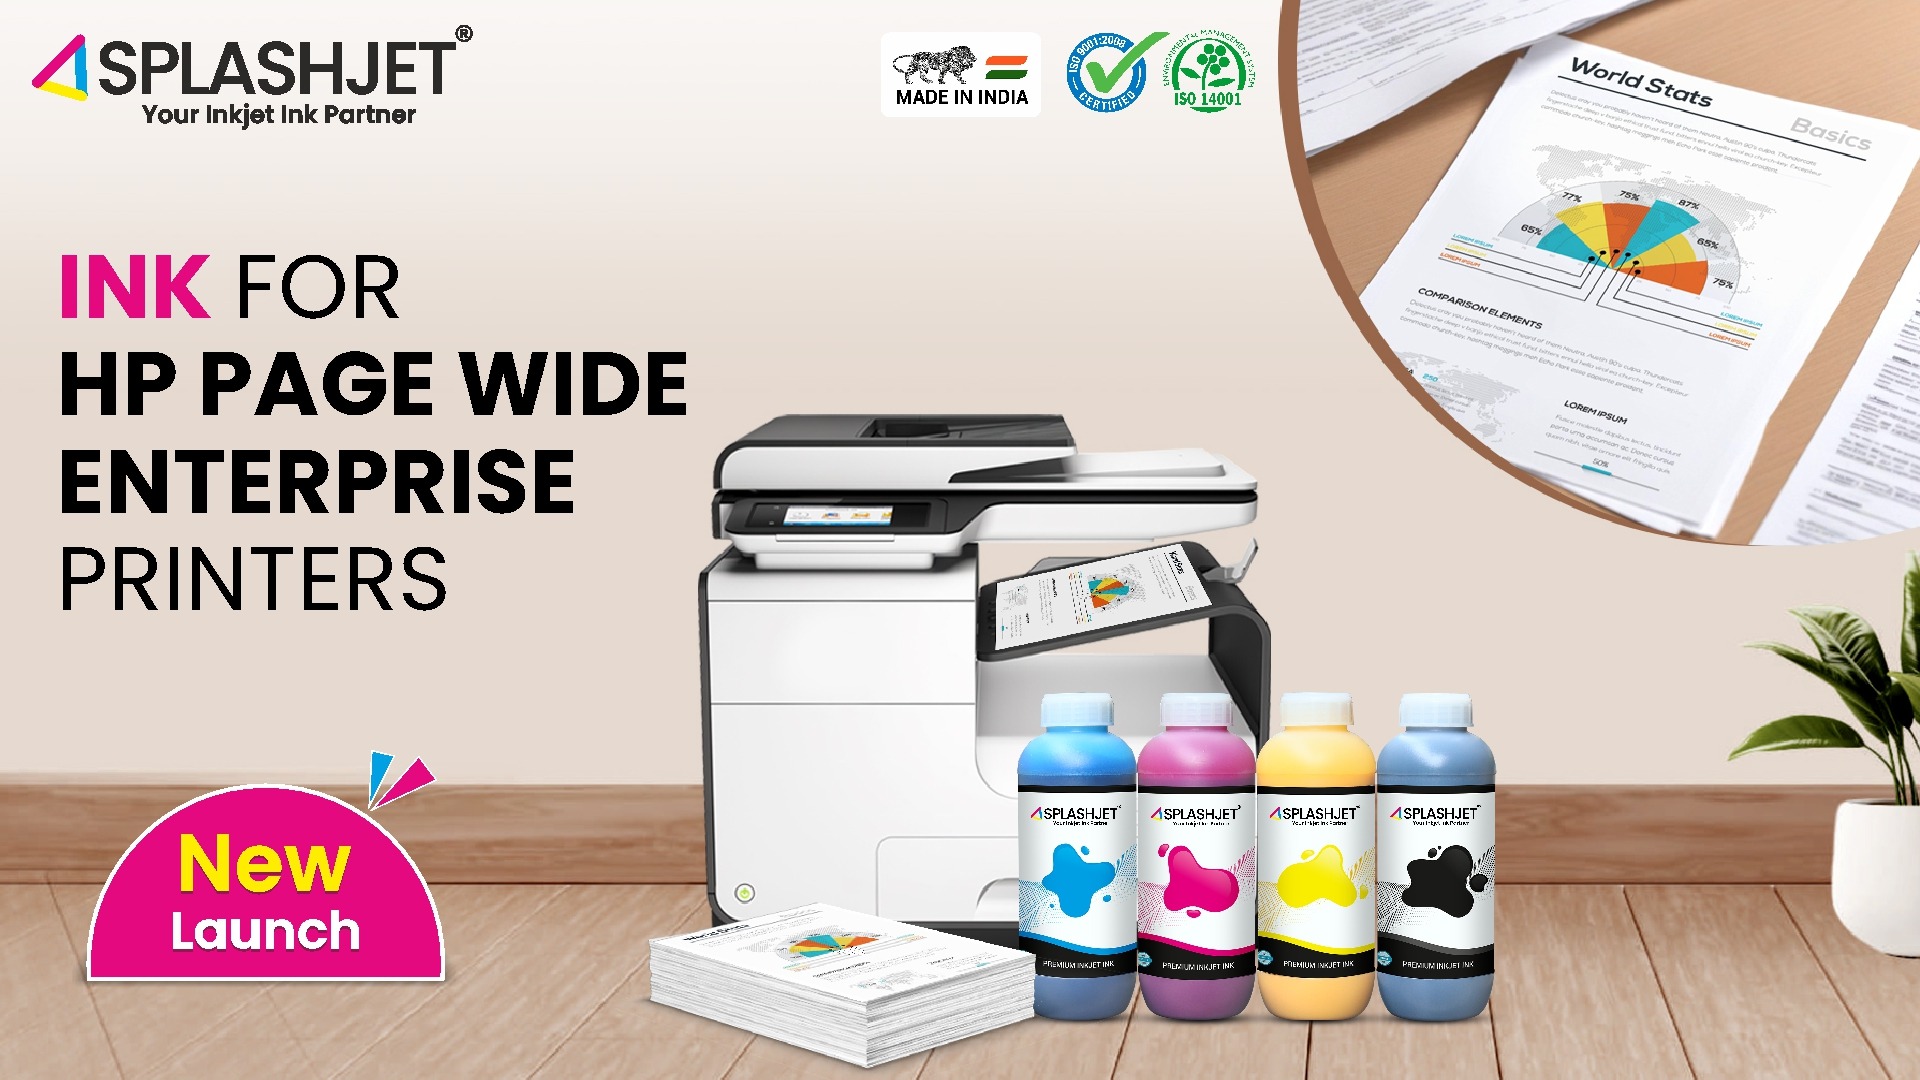 High-Performance Ink for HP PageWide Printers